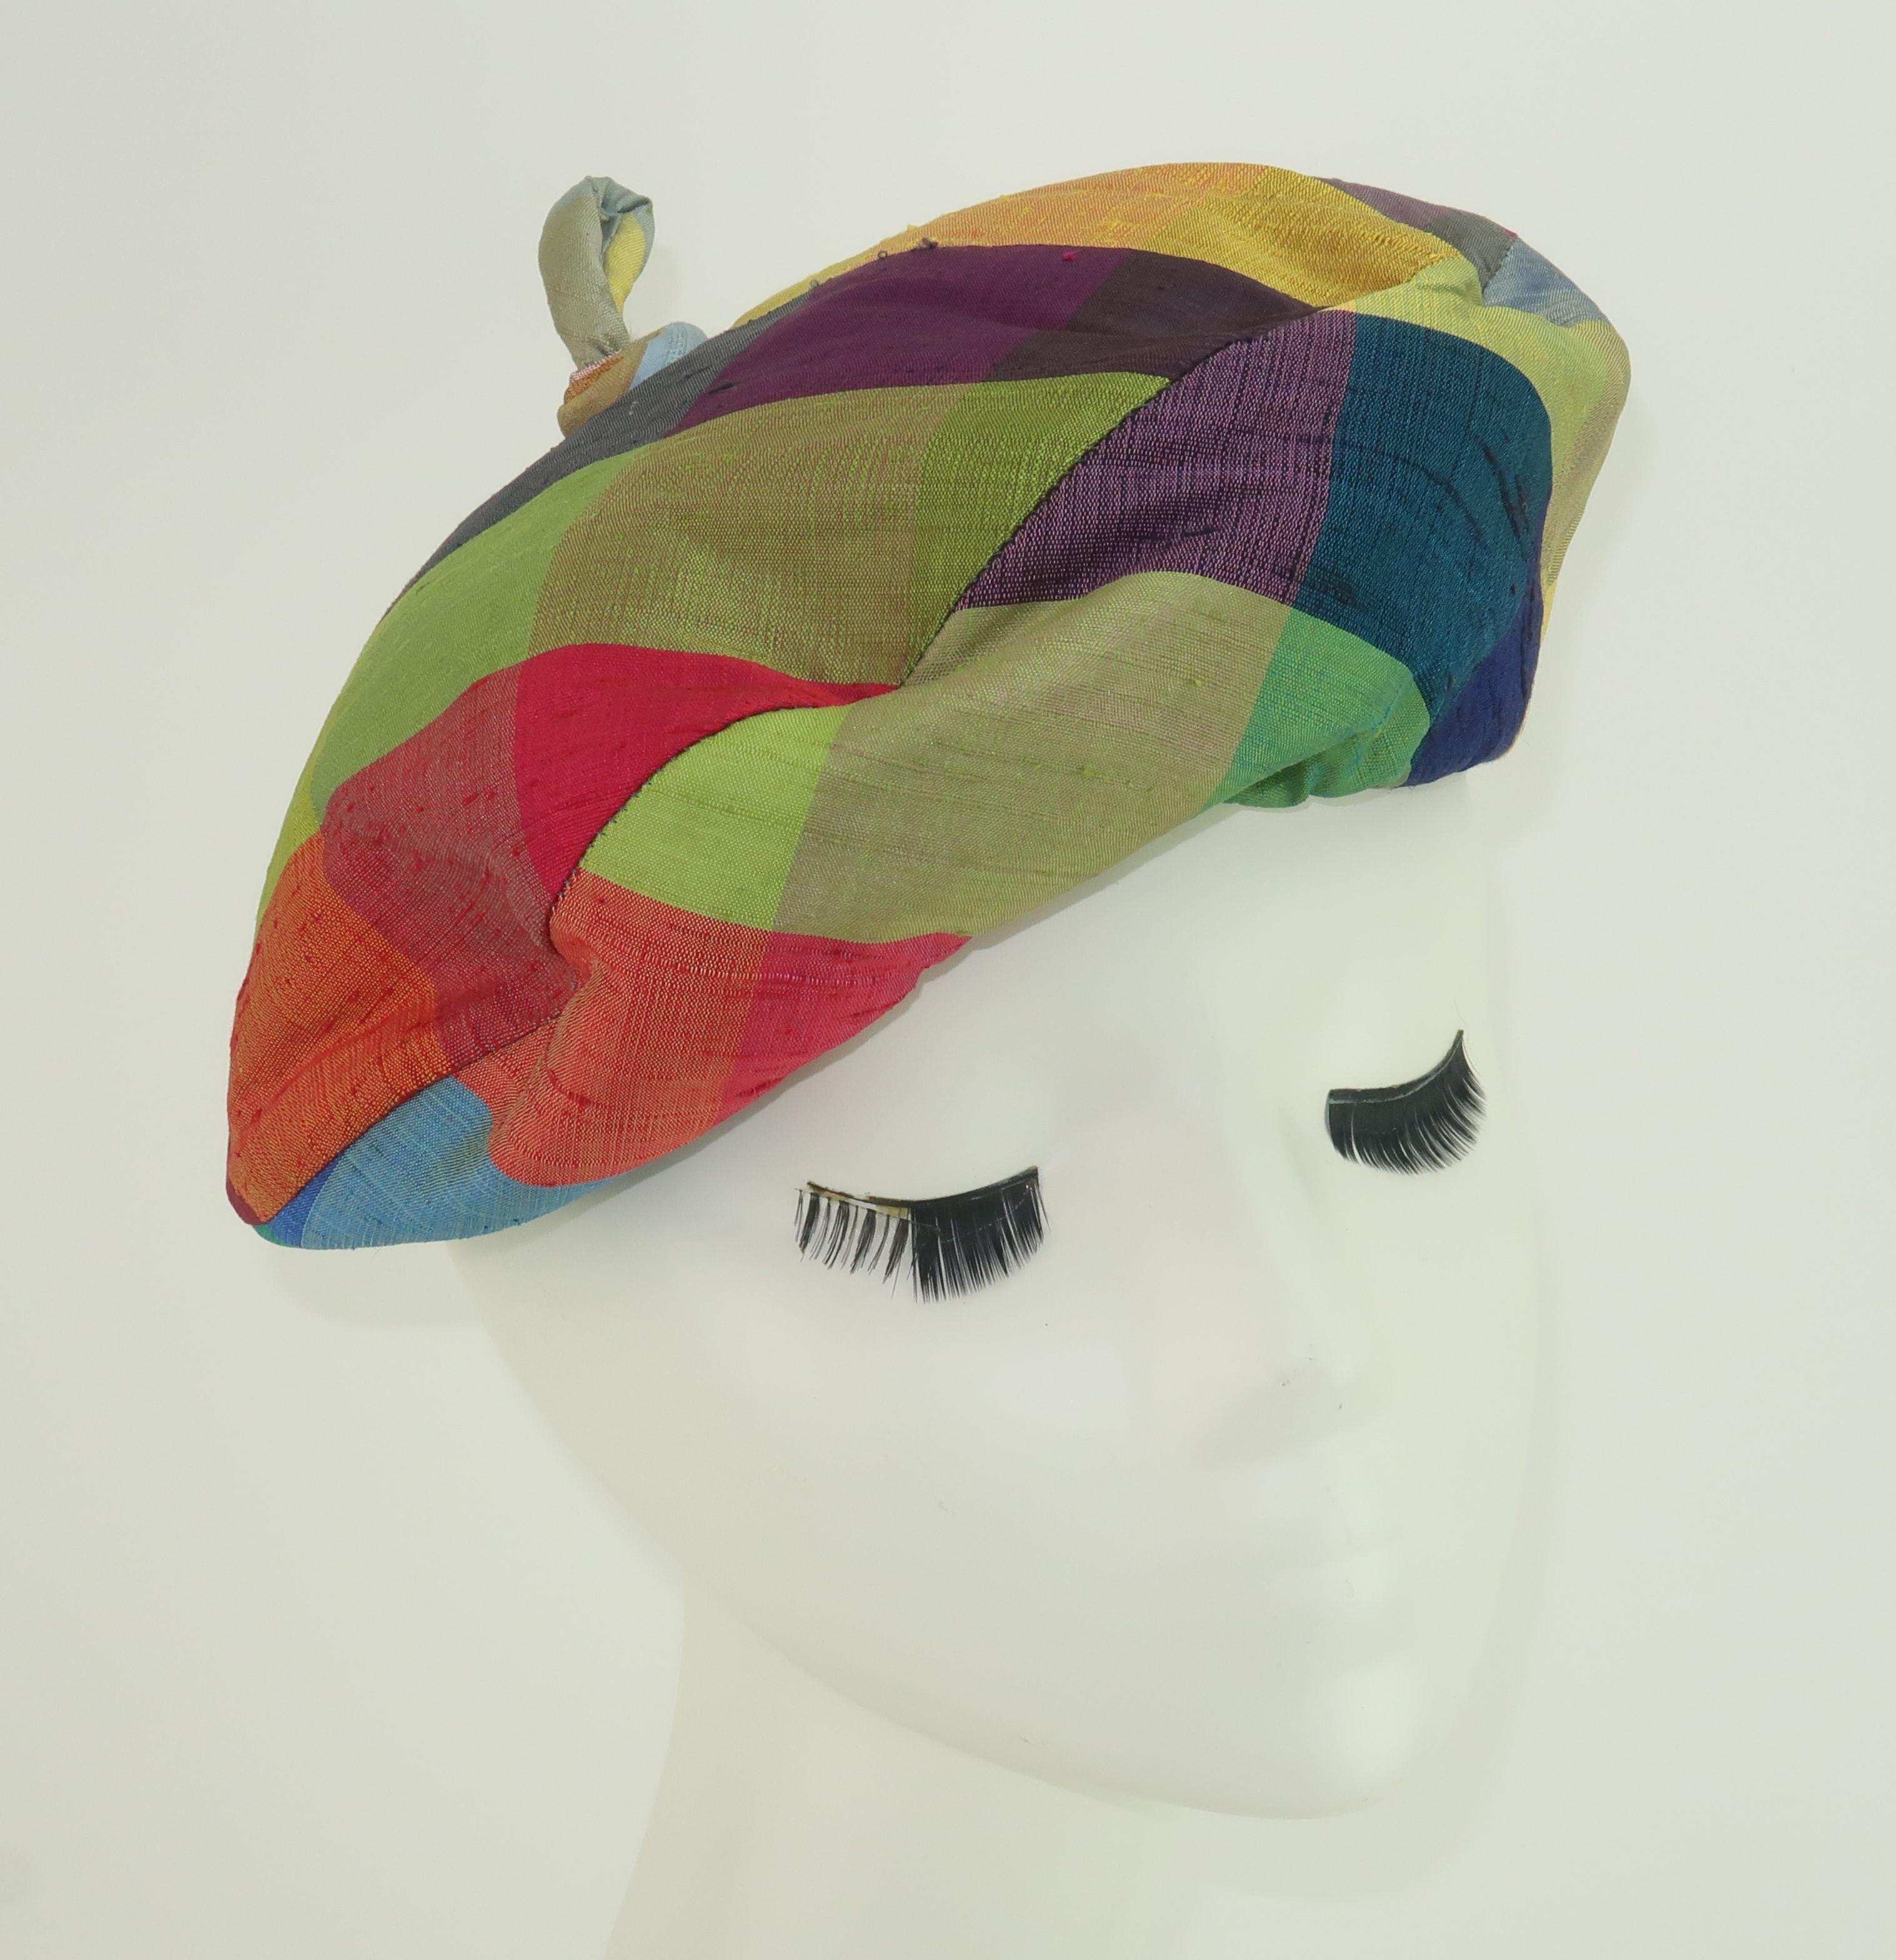 C.1960 Patrice silk madras hat with a beret silhouette in jewel tone colors including blue, fuchsia, yellow, olive green, purple, red and orange.  The swirled finial is the cherry on top!  Padded for shape and lined in gray silk faille fabric with